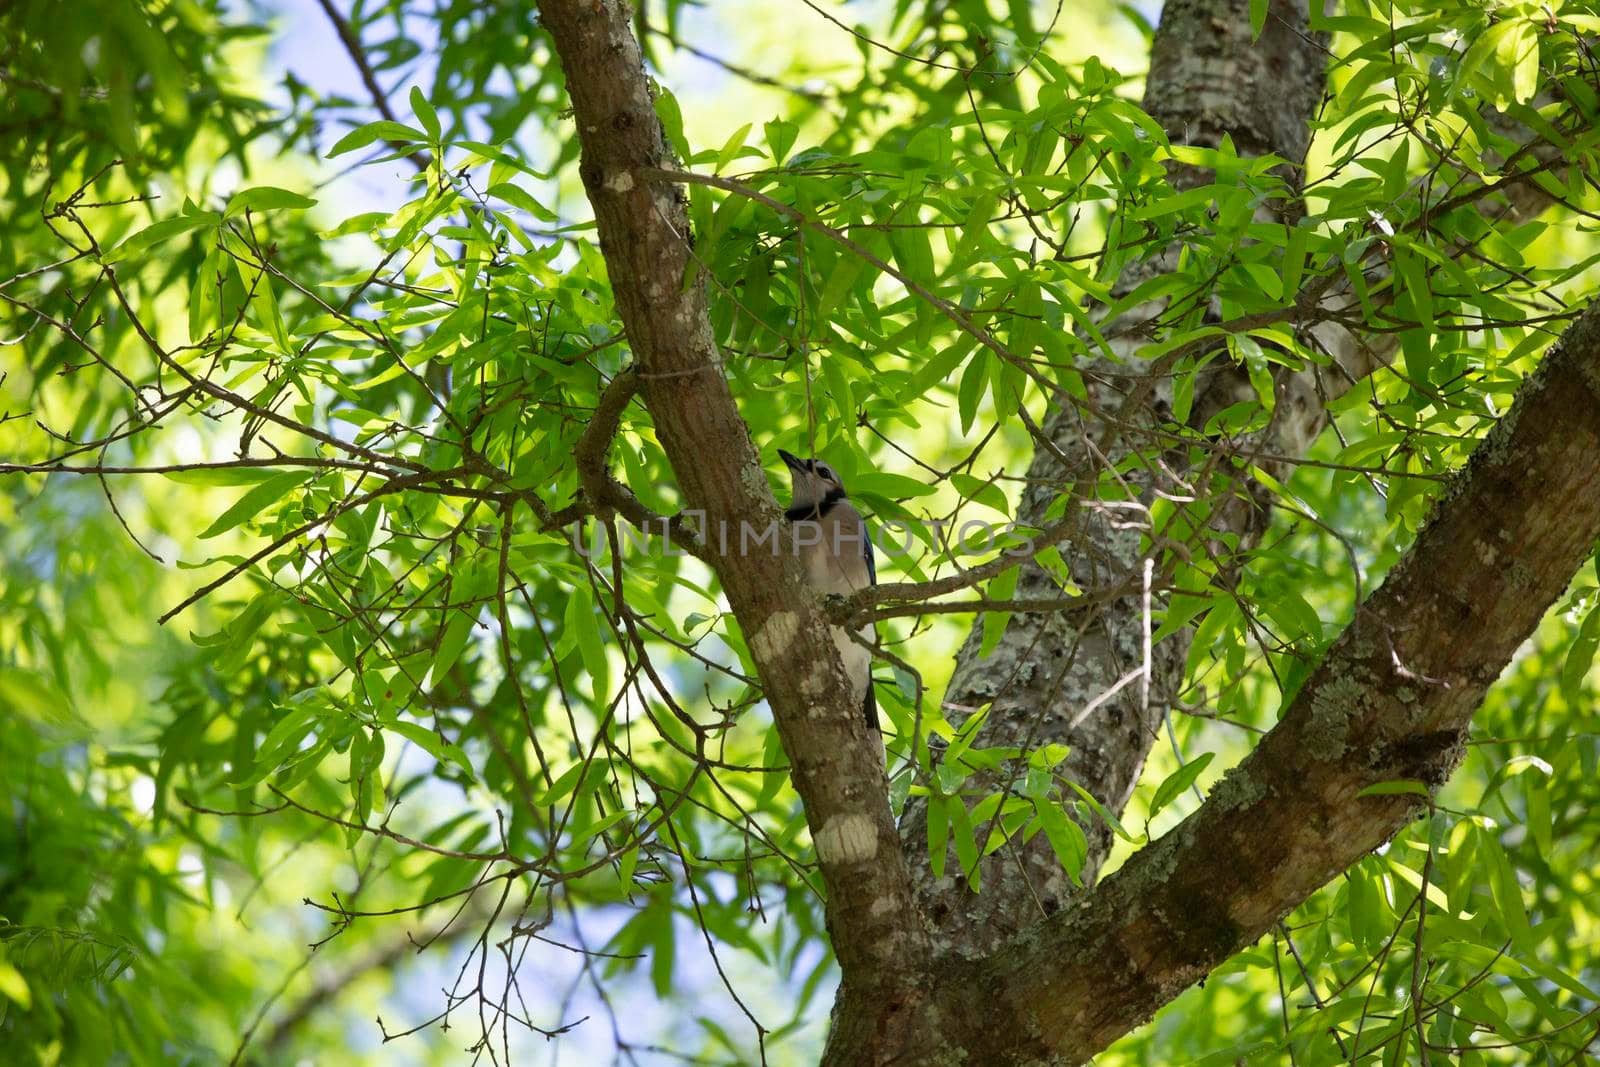 Blue jay (Cyanocitta cristata) perched in a tree